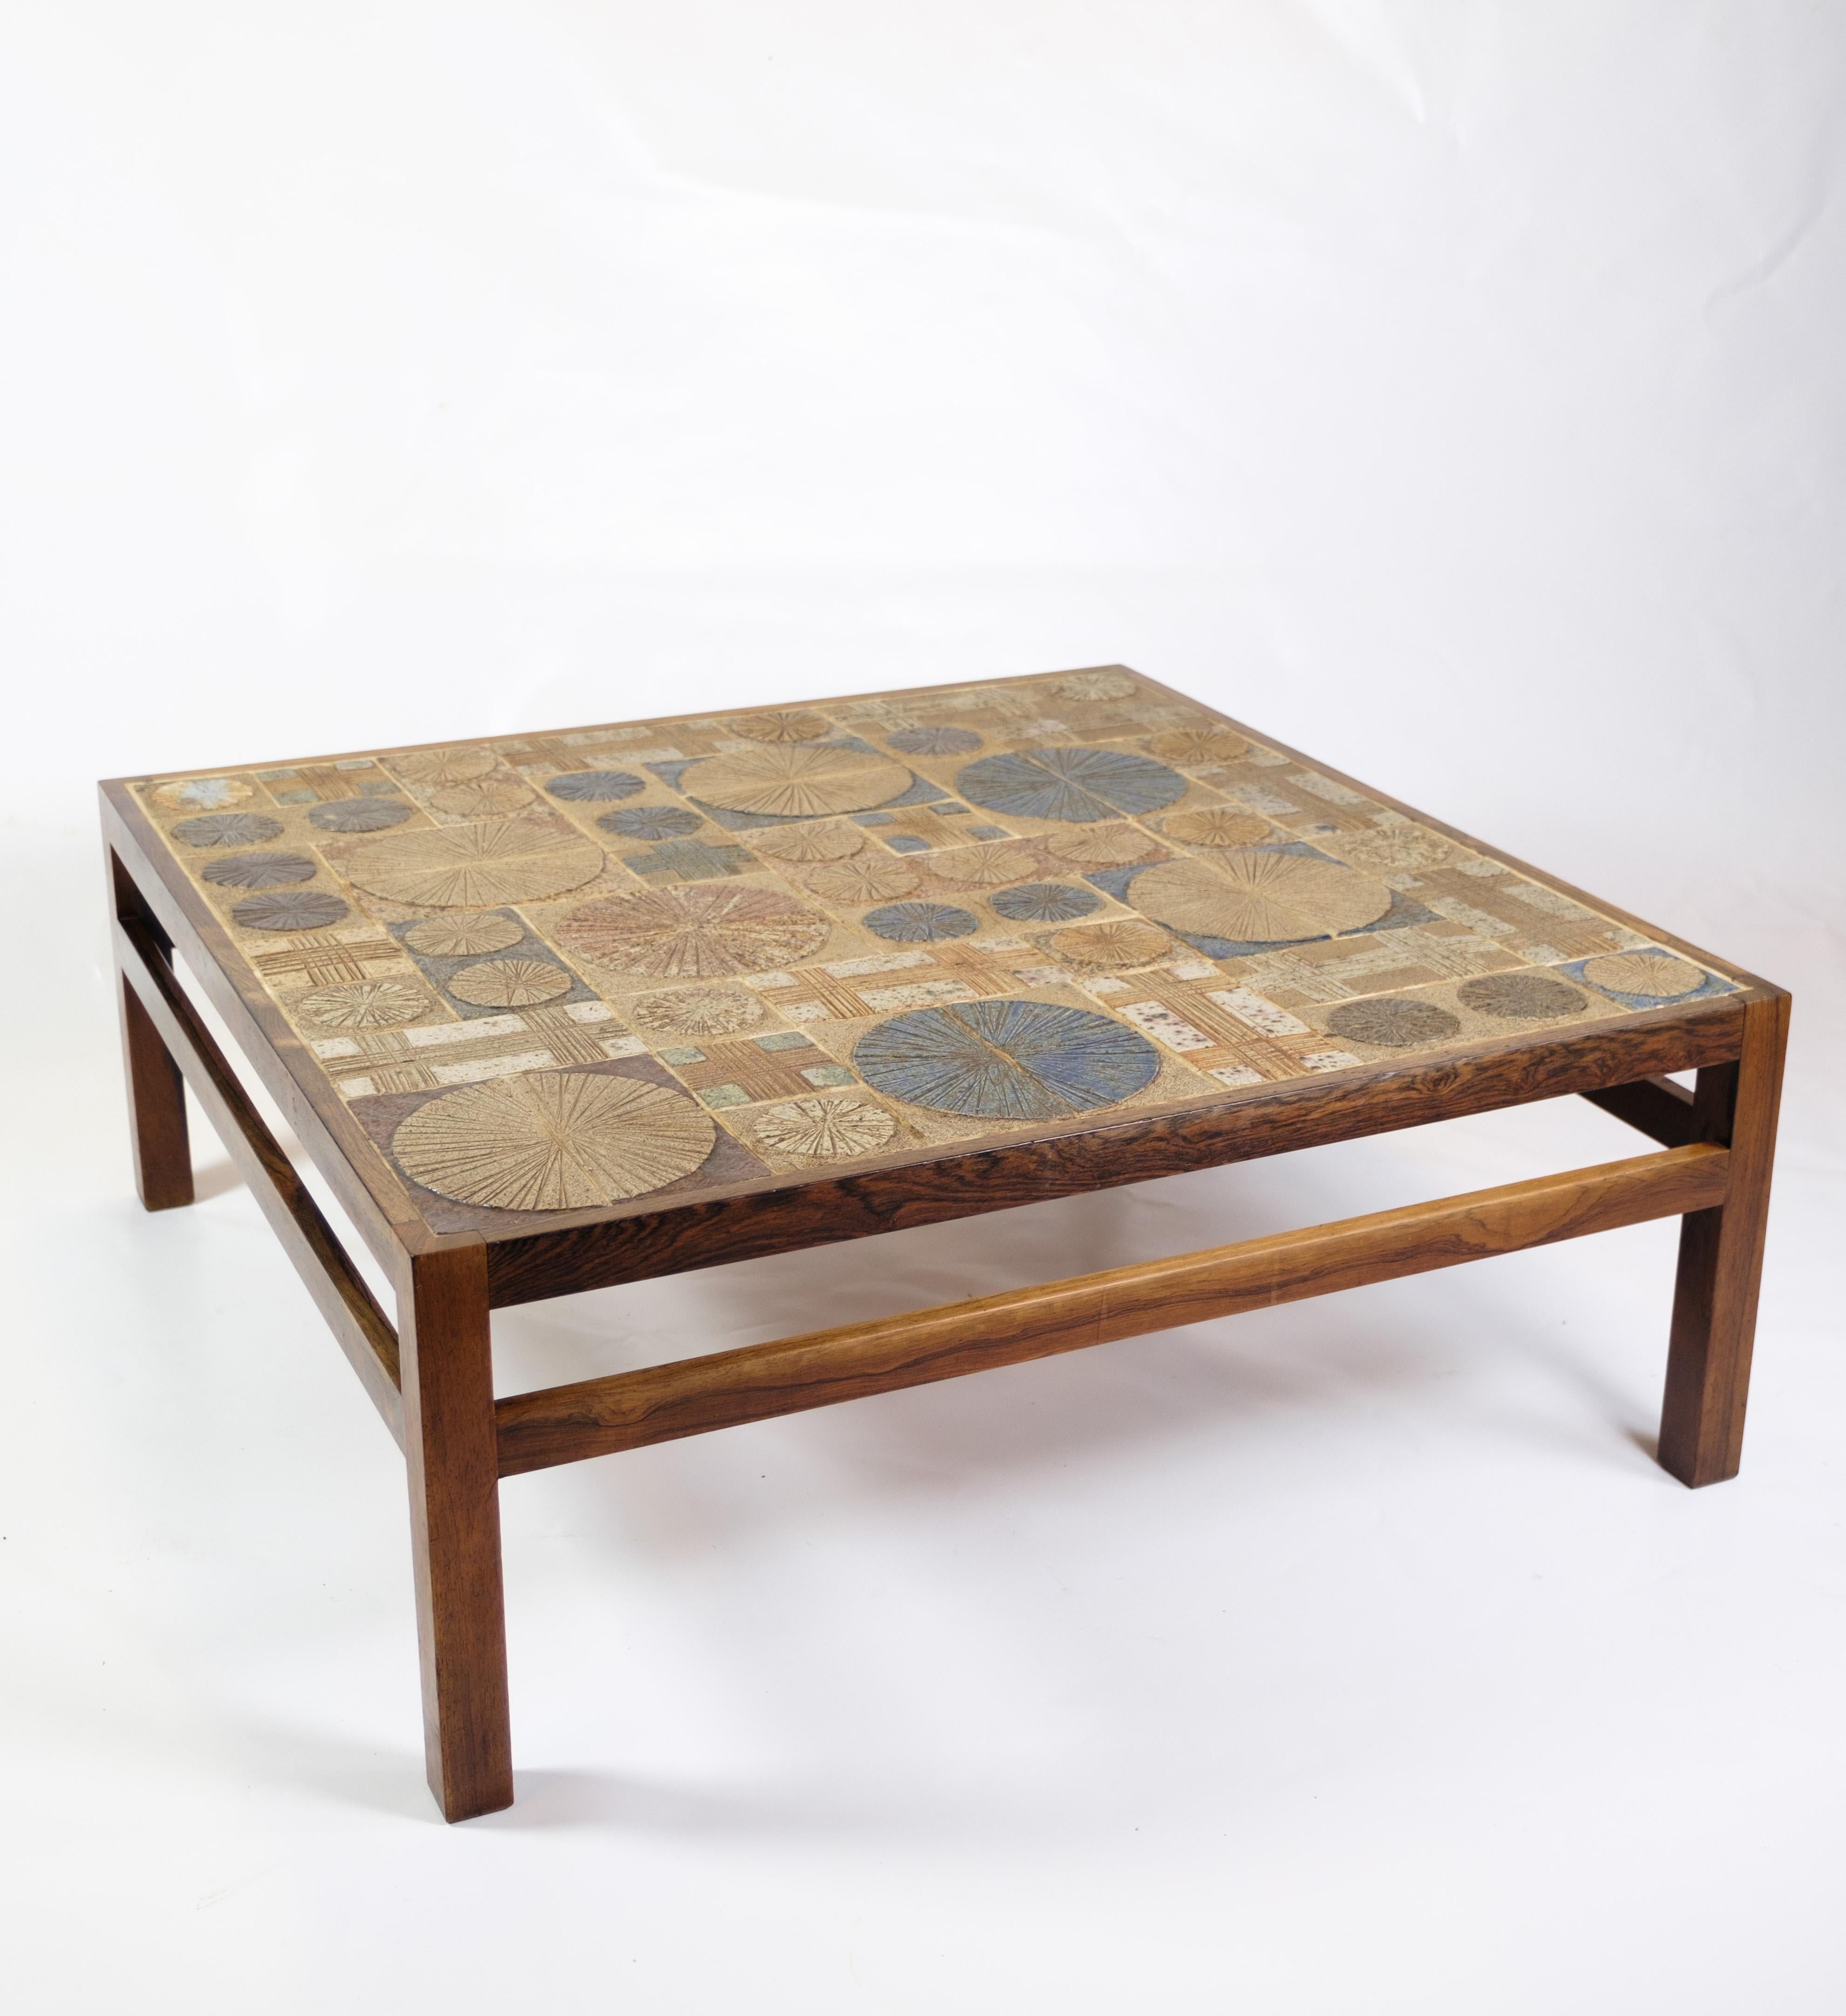 Ceramic Sofa Table Made In Rosewood With Tiles Designed By Tue Poulsen From 1960s